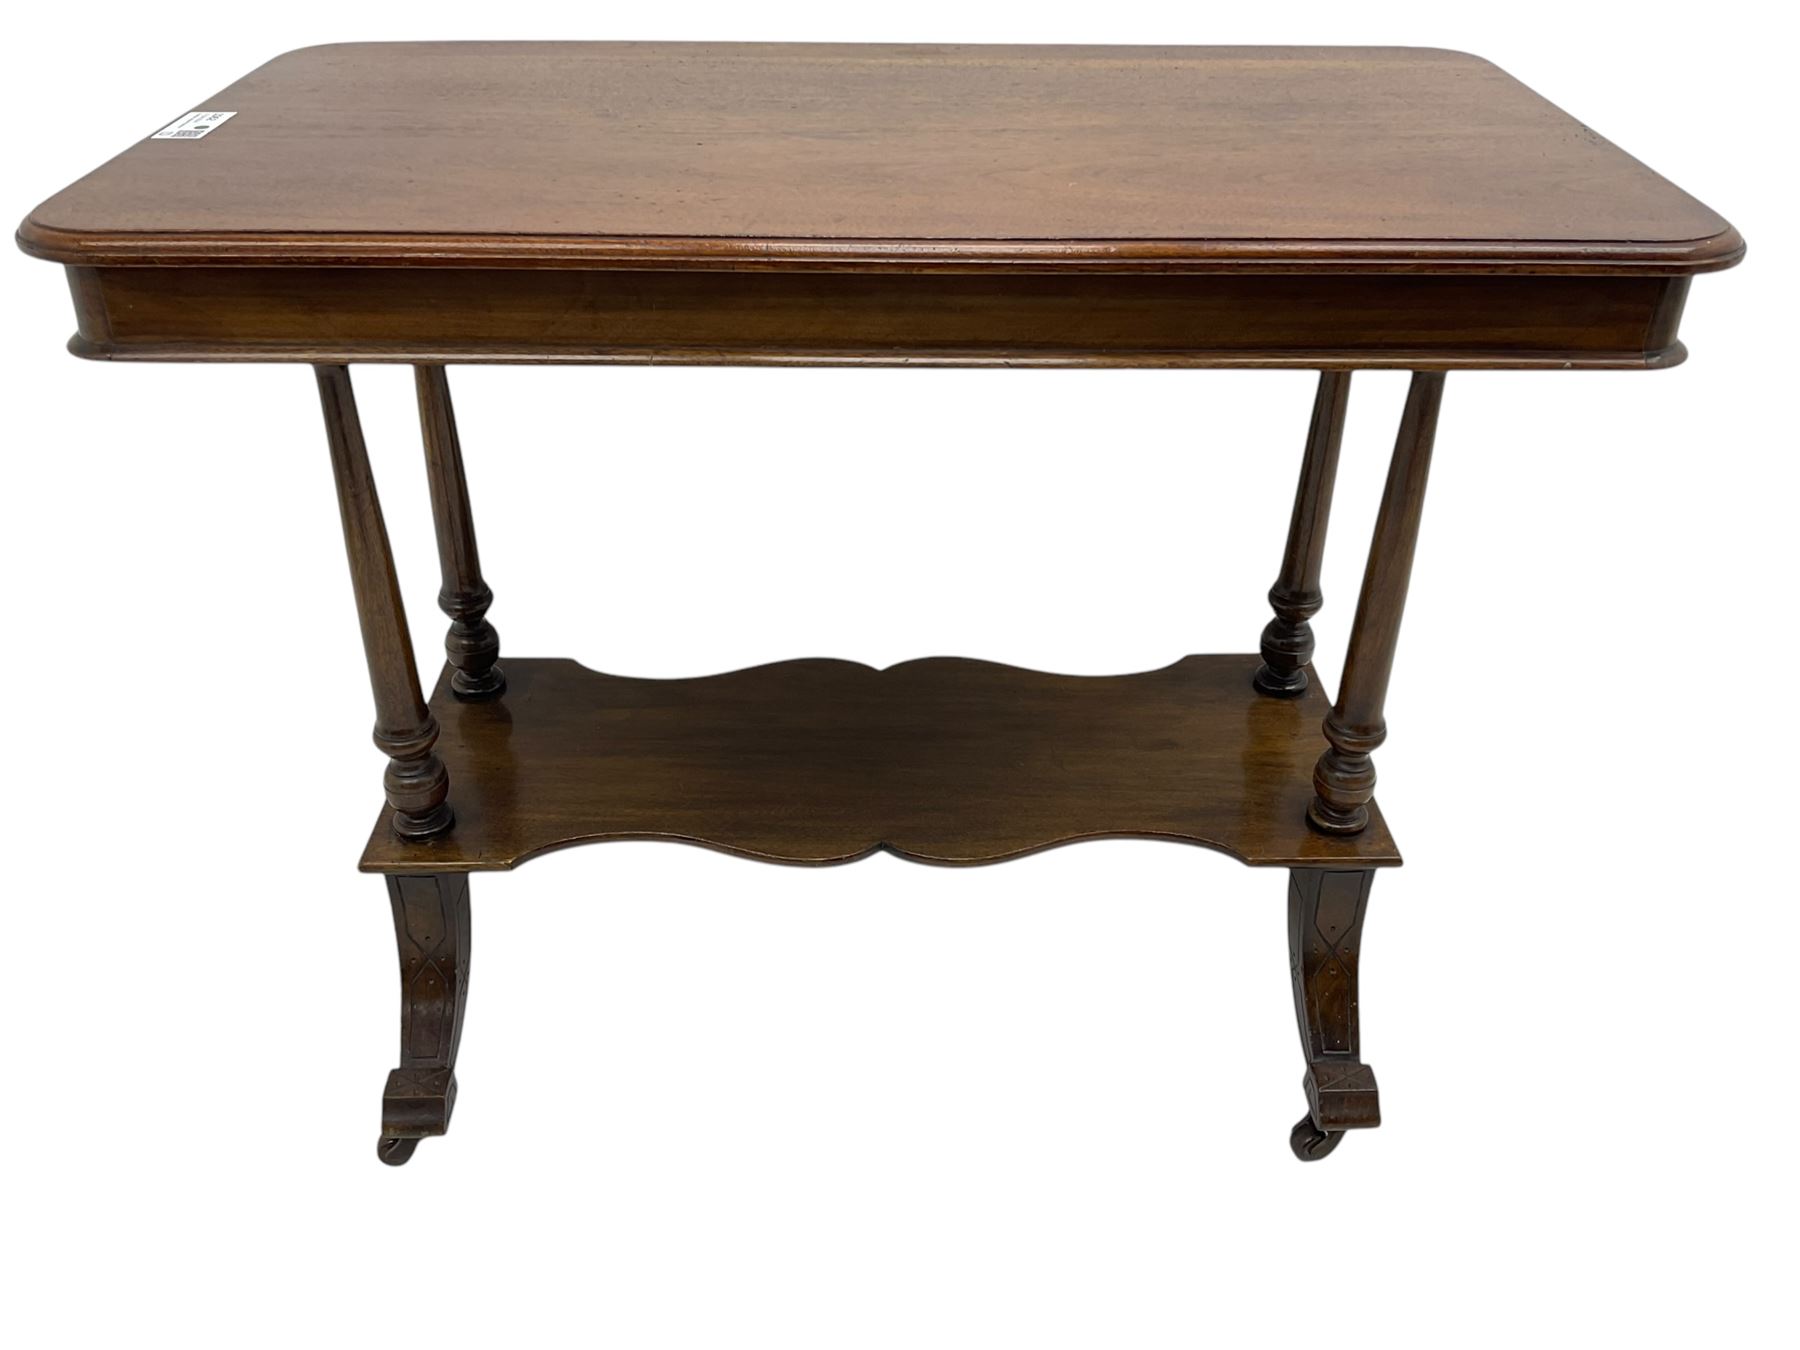 Late Victorian mahogany Aesthetic movement side table - Image 7 of 8